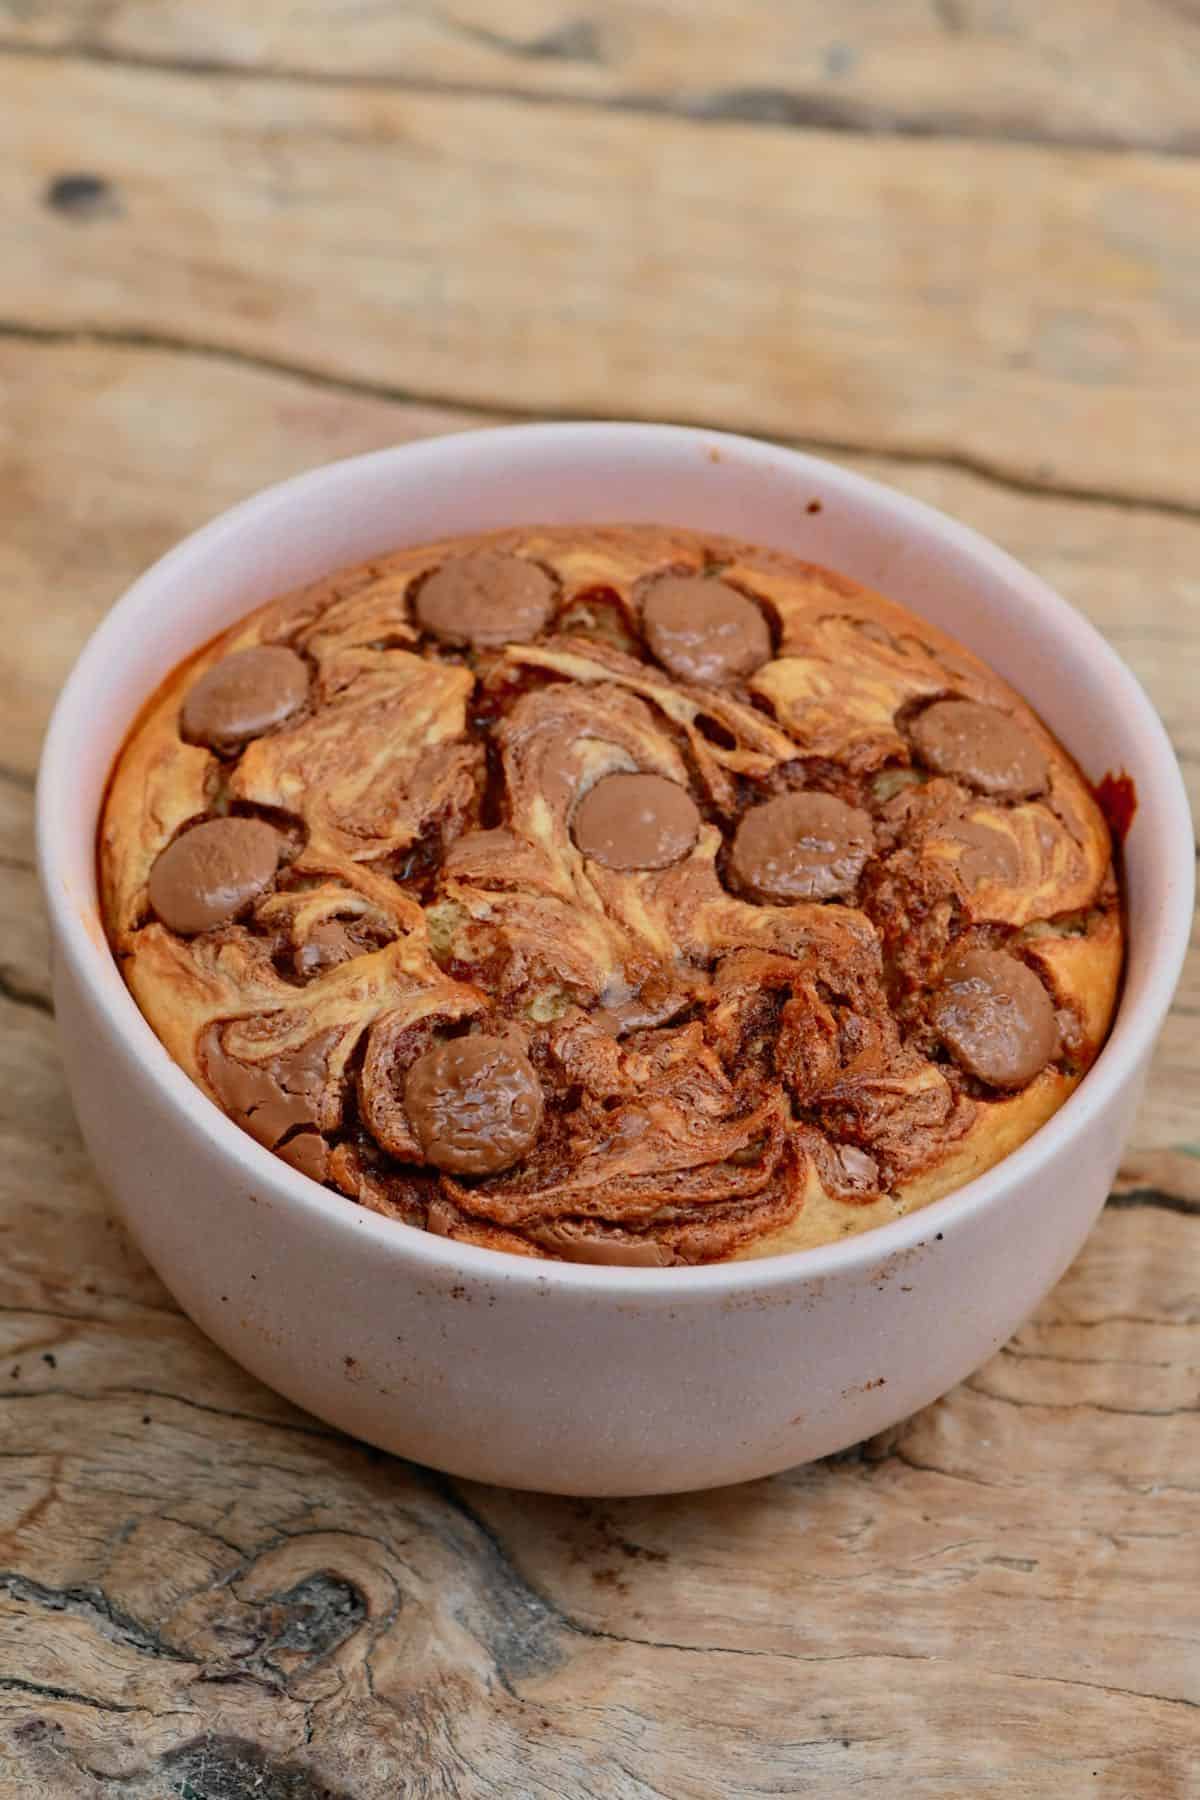 Baked oats with peanut butter and chocolate chips